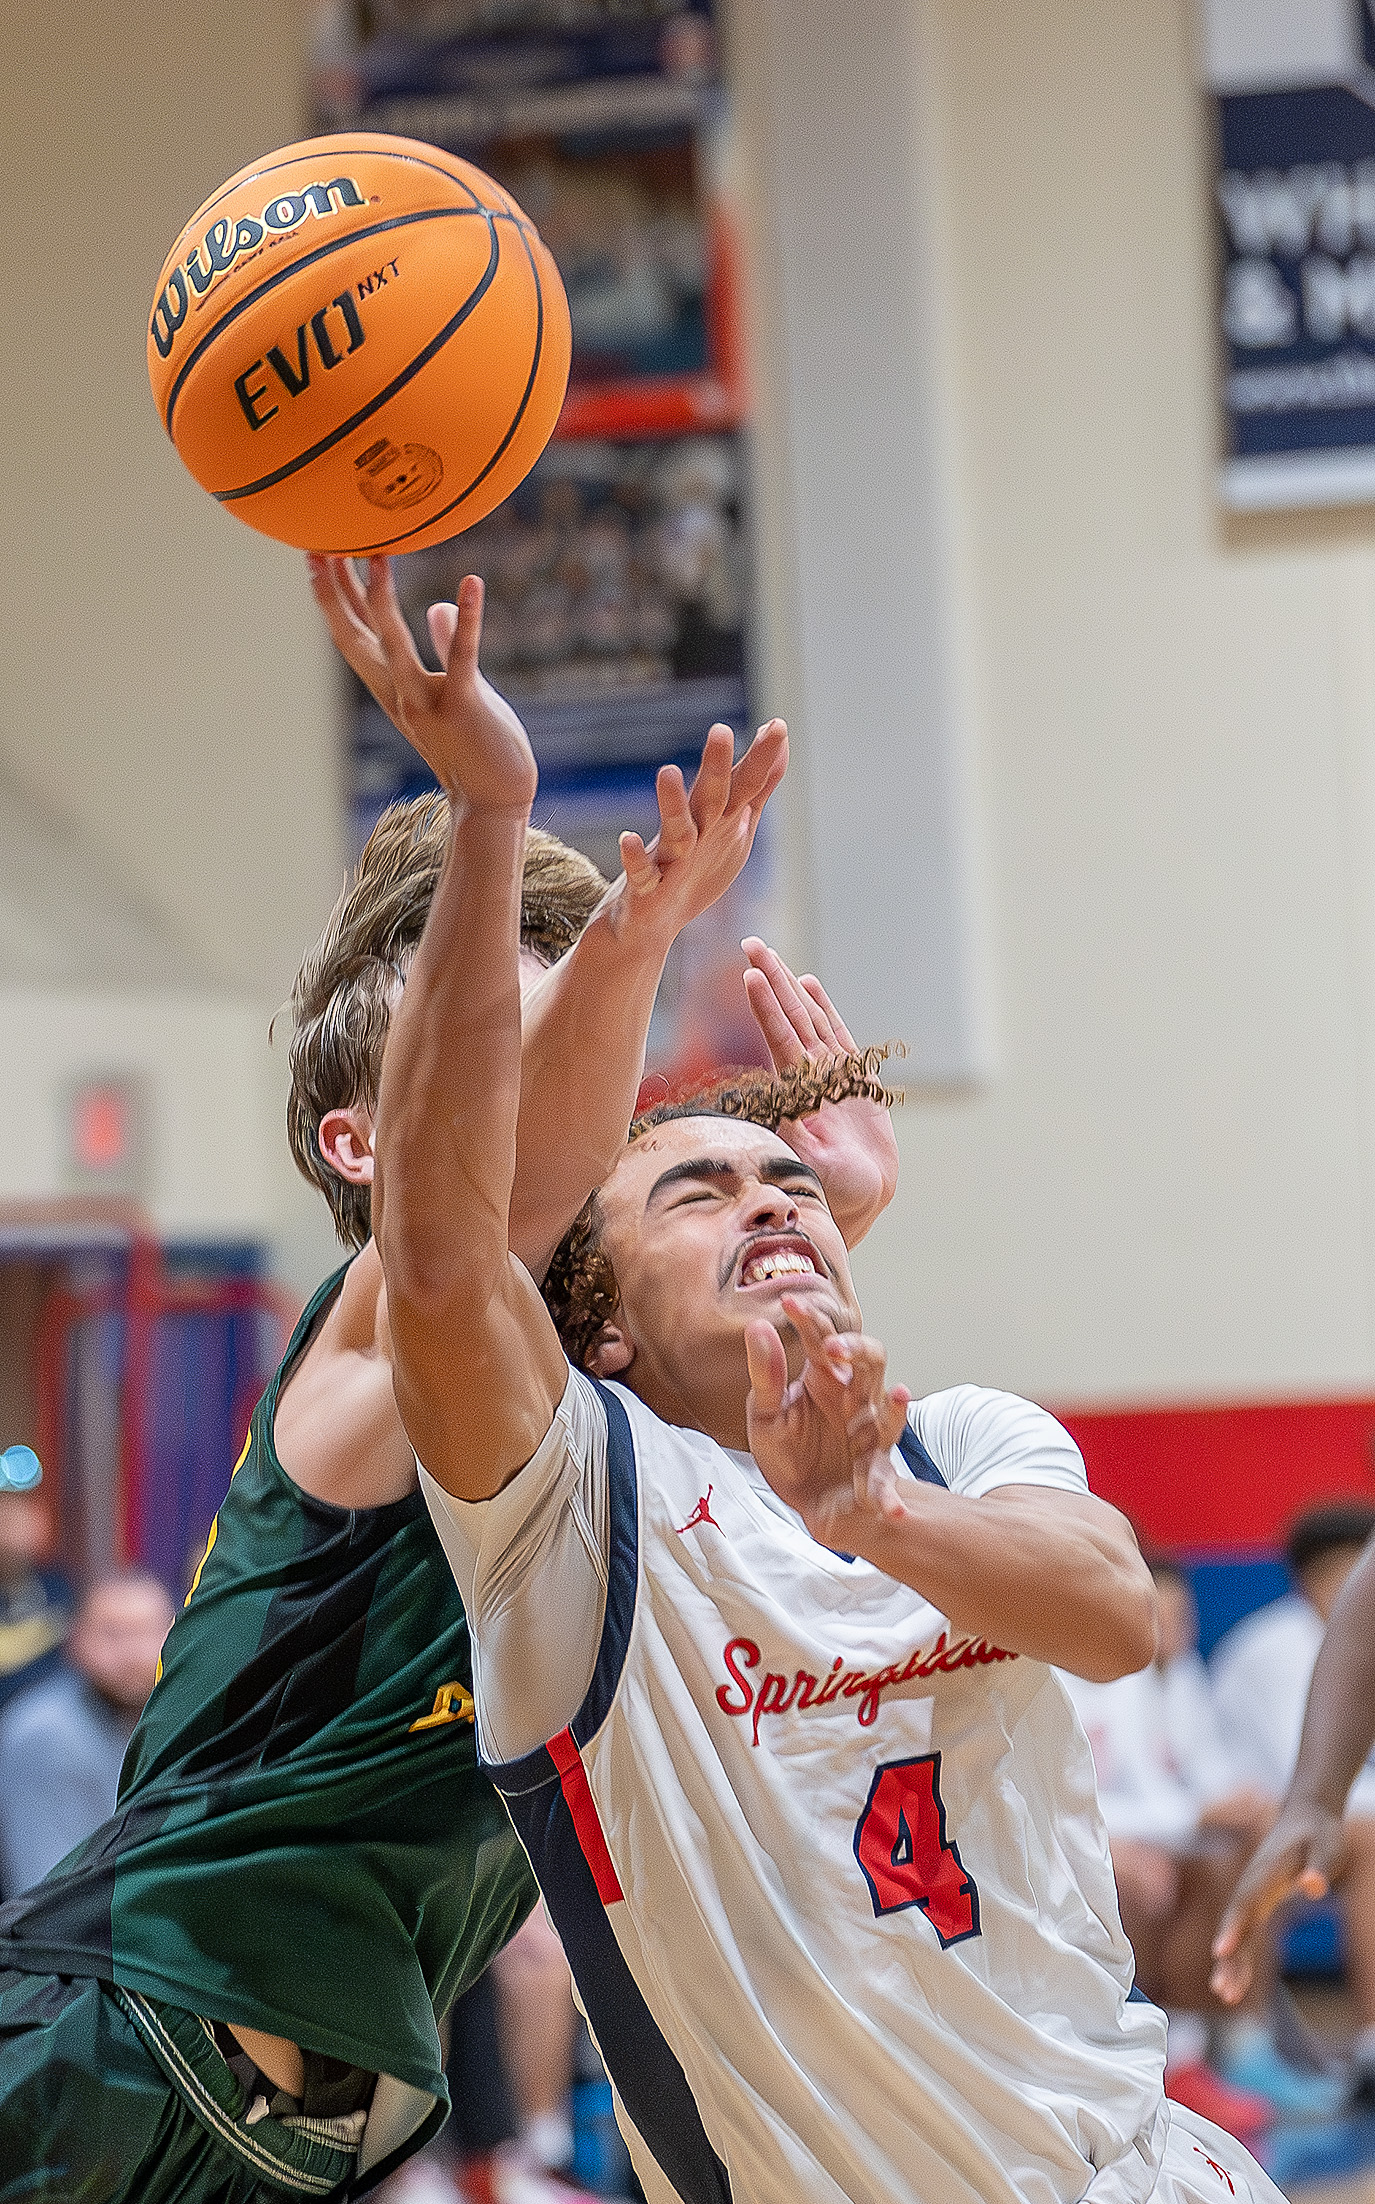 Springstead High's ,4, Zylus Pastrana gets fouled from behind on a shot attempt in the home game with Lecanto High. Photo by Joe DiCristofalo